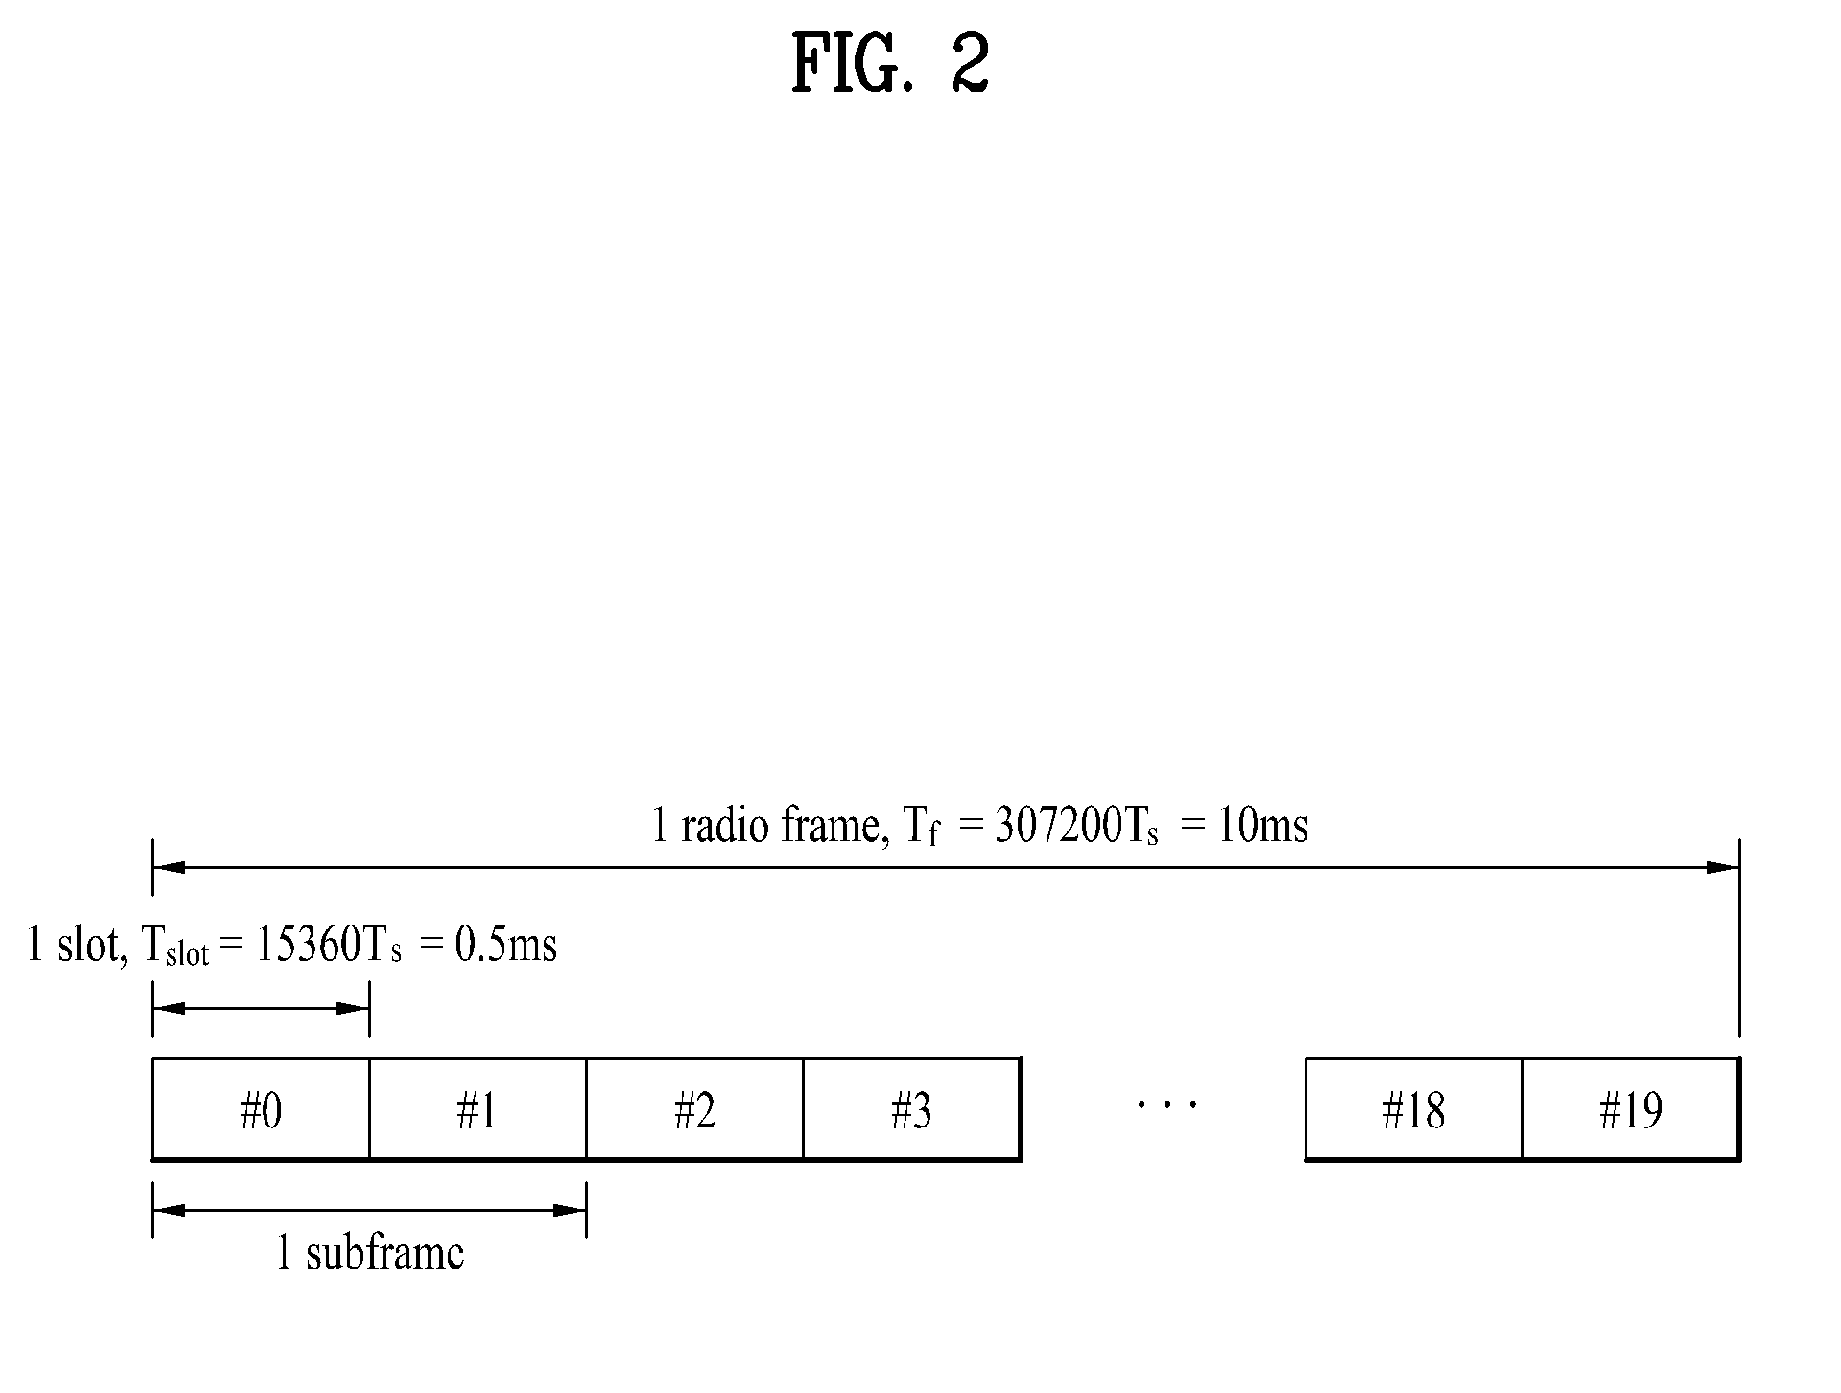 Method and apparatus for transceiving data via a contention-based physical uplink data channel